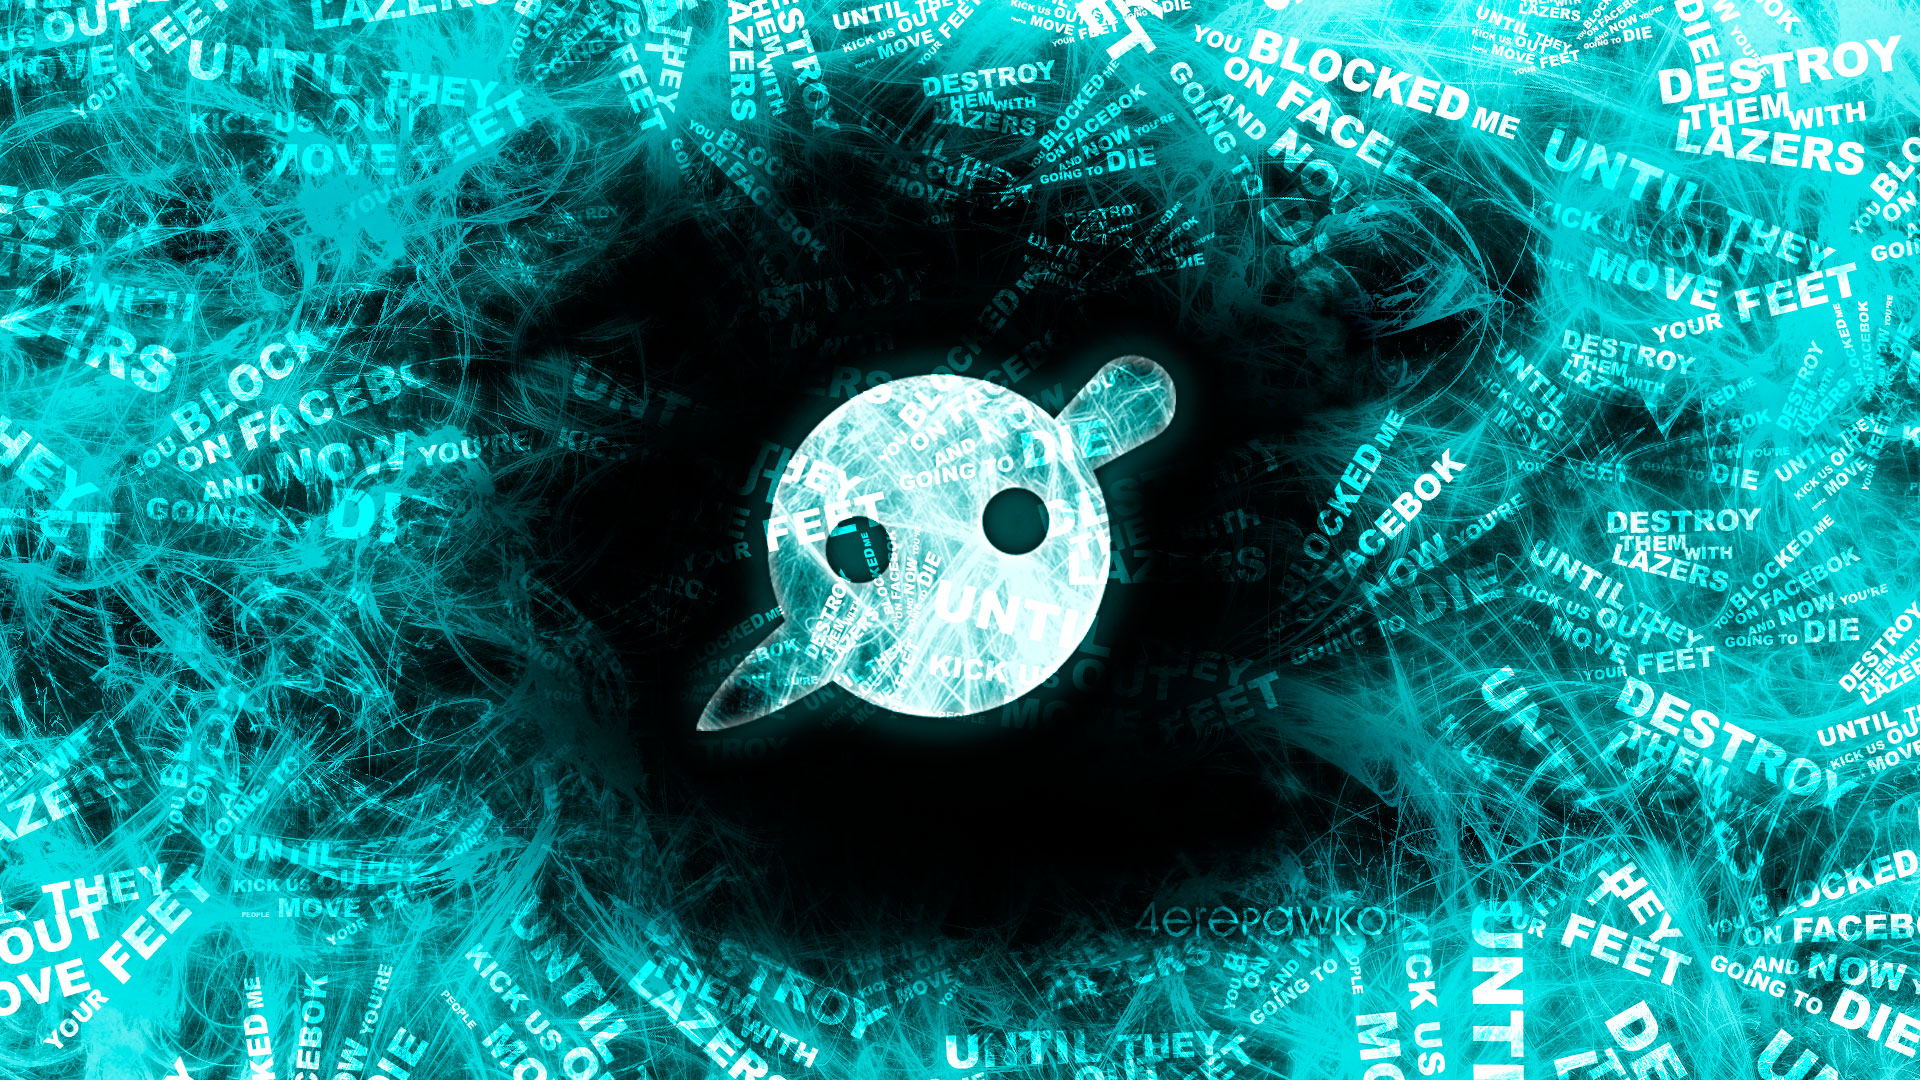 Knife Party Wallpapers